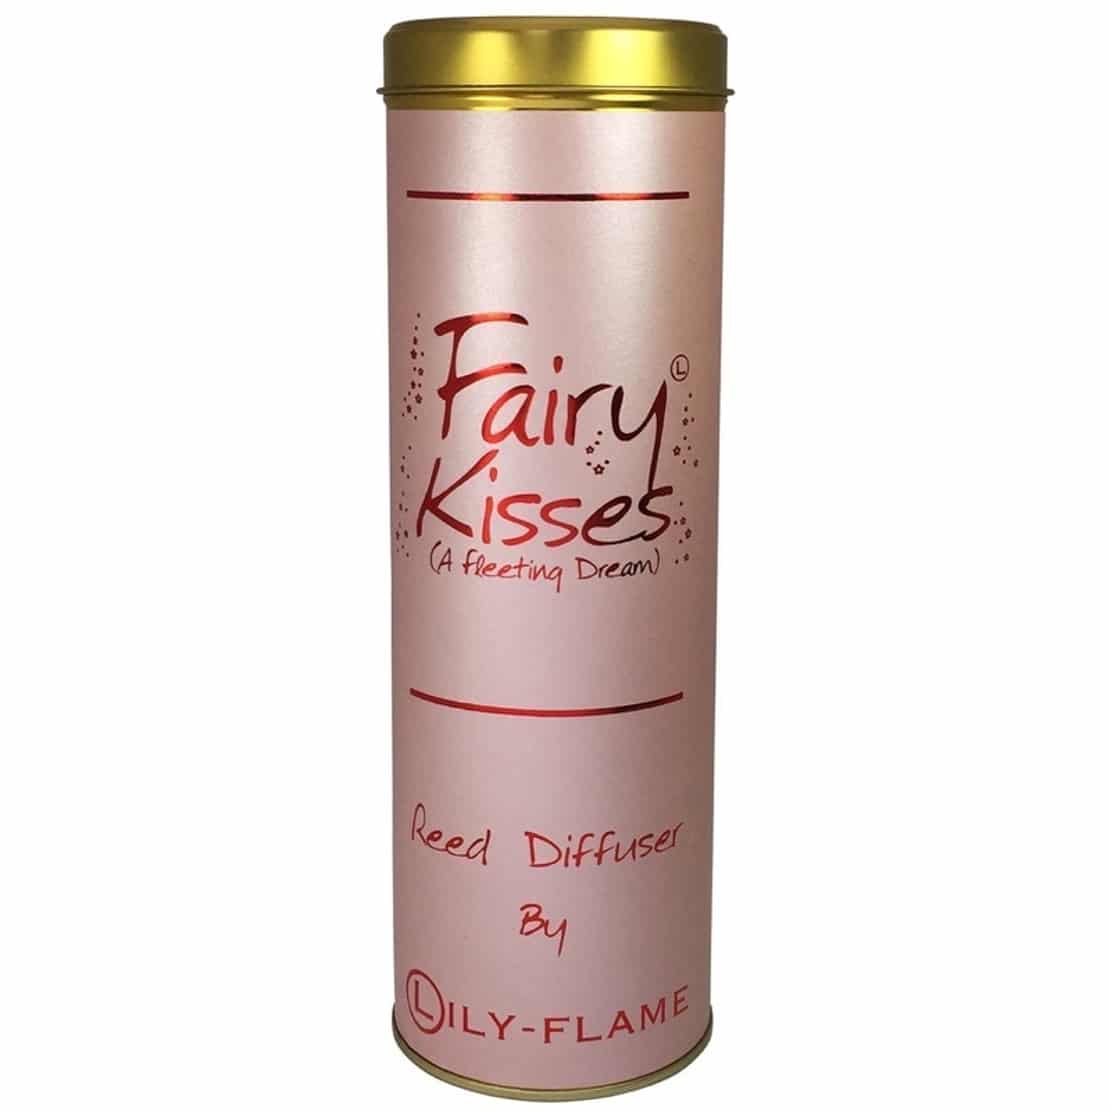 Lily Flame Fairy Kisses Reed Diffuser